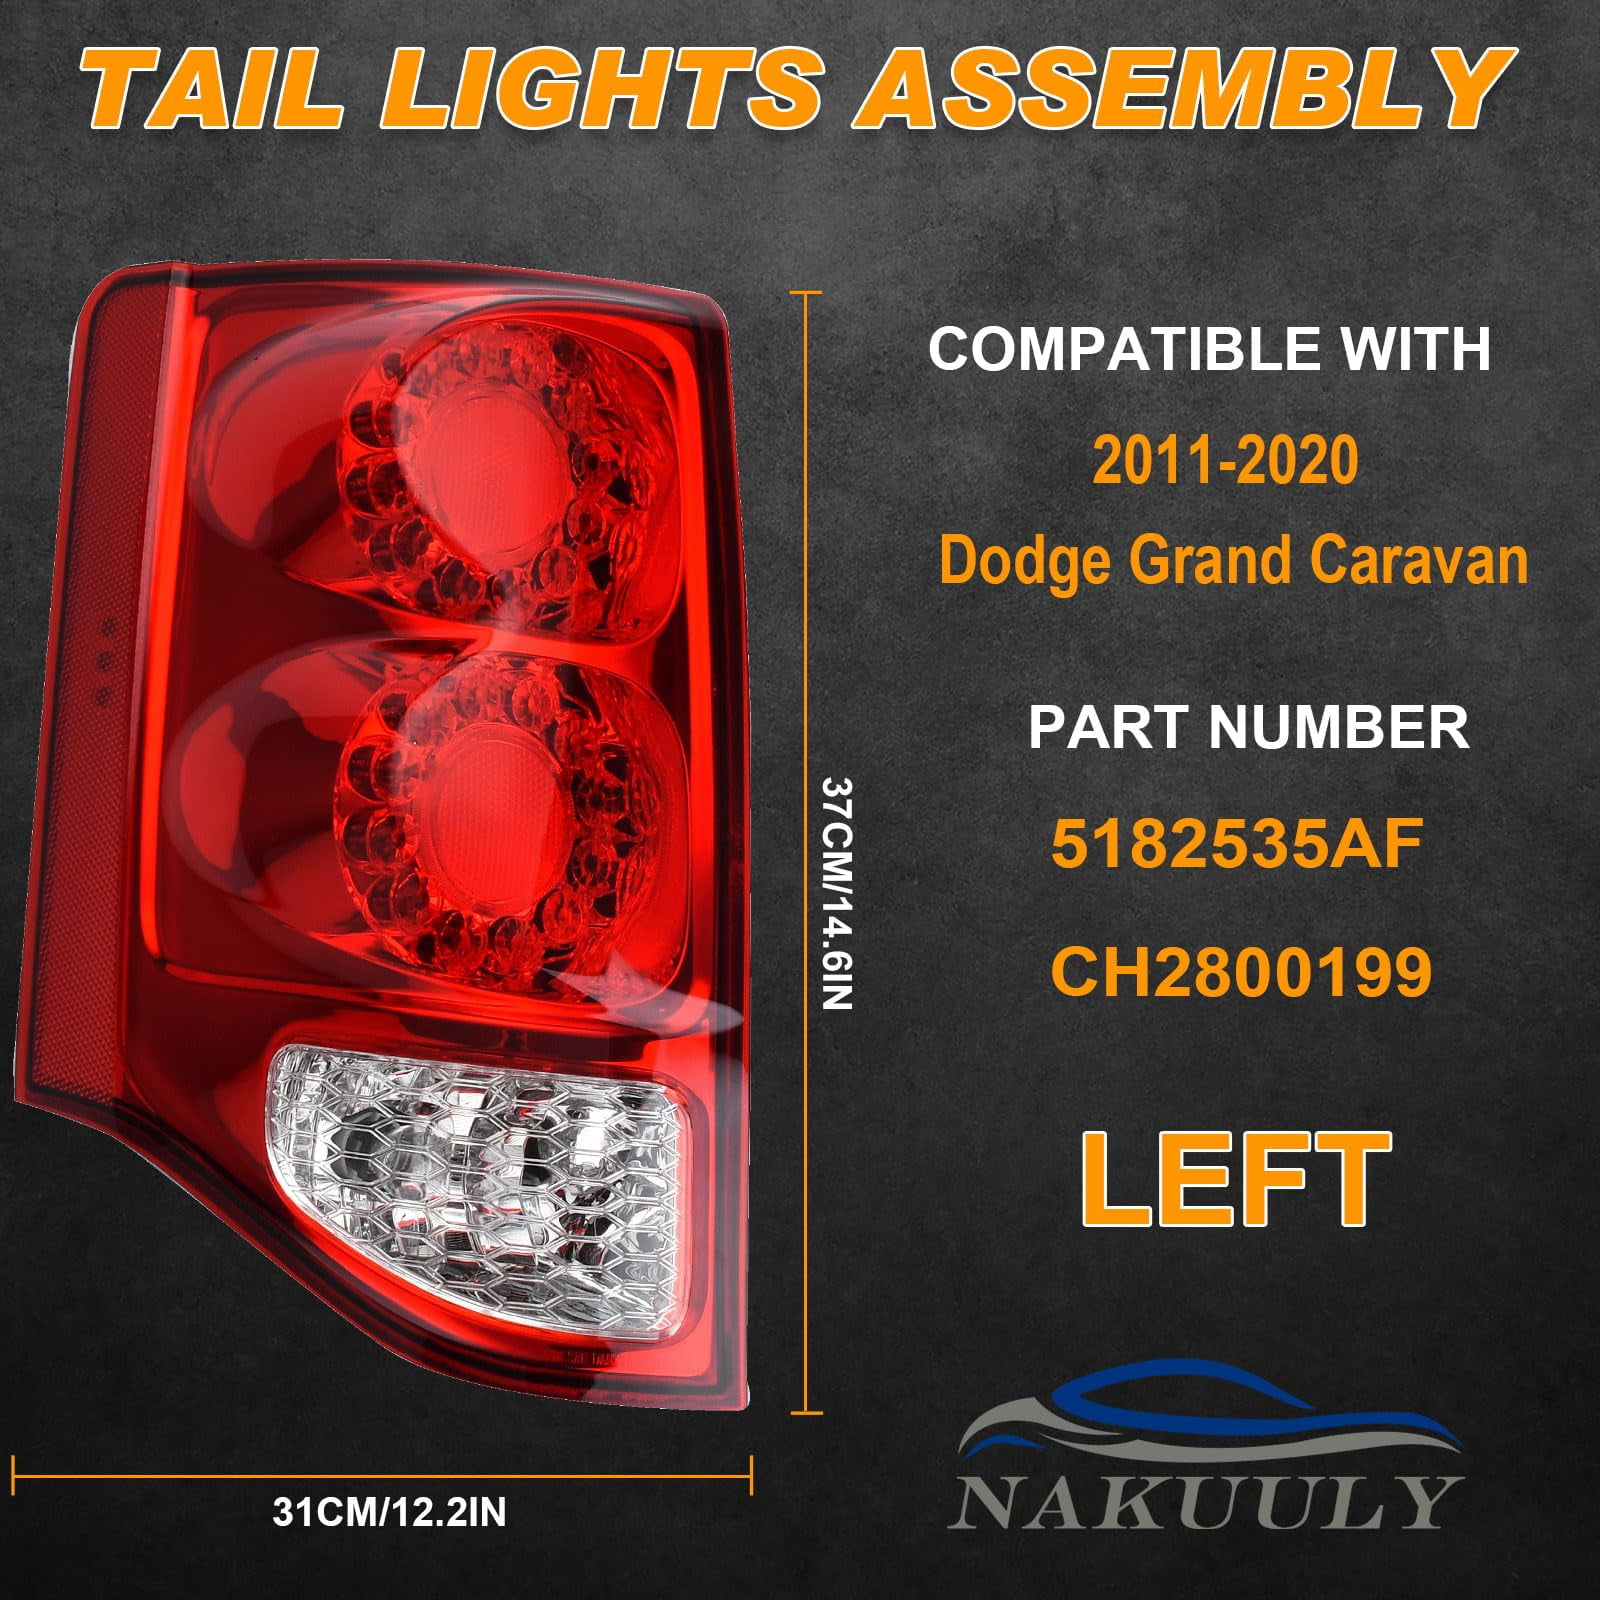 Nakuuly Tail Light Compatible SE33 With 2011-2020 Dodge Grand